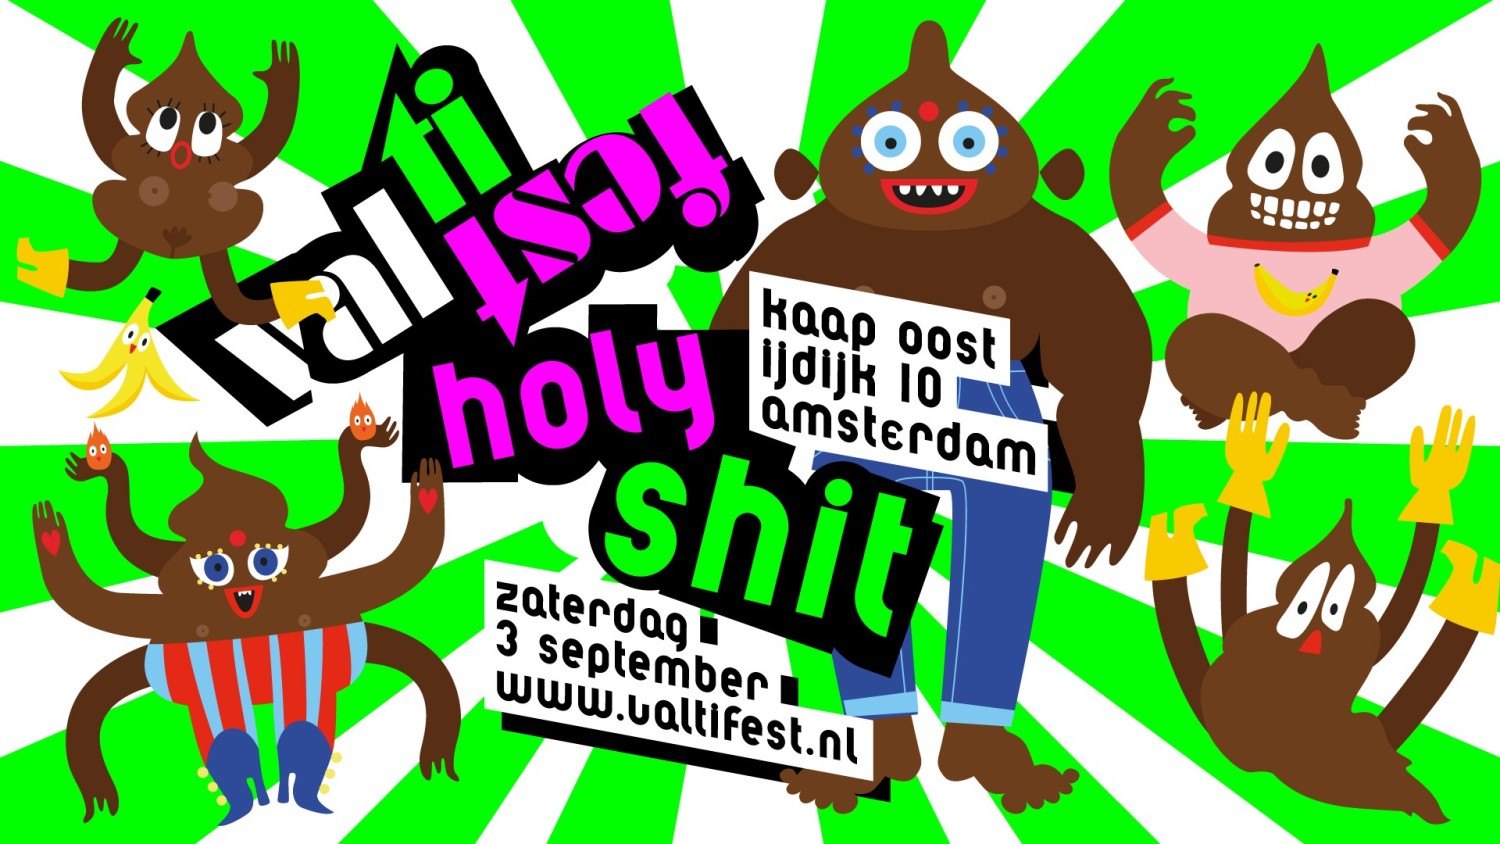 Party nieuws: Valtifest 2022 HOLY SHIT!